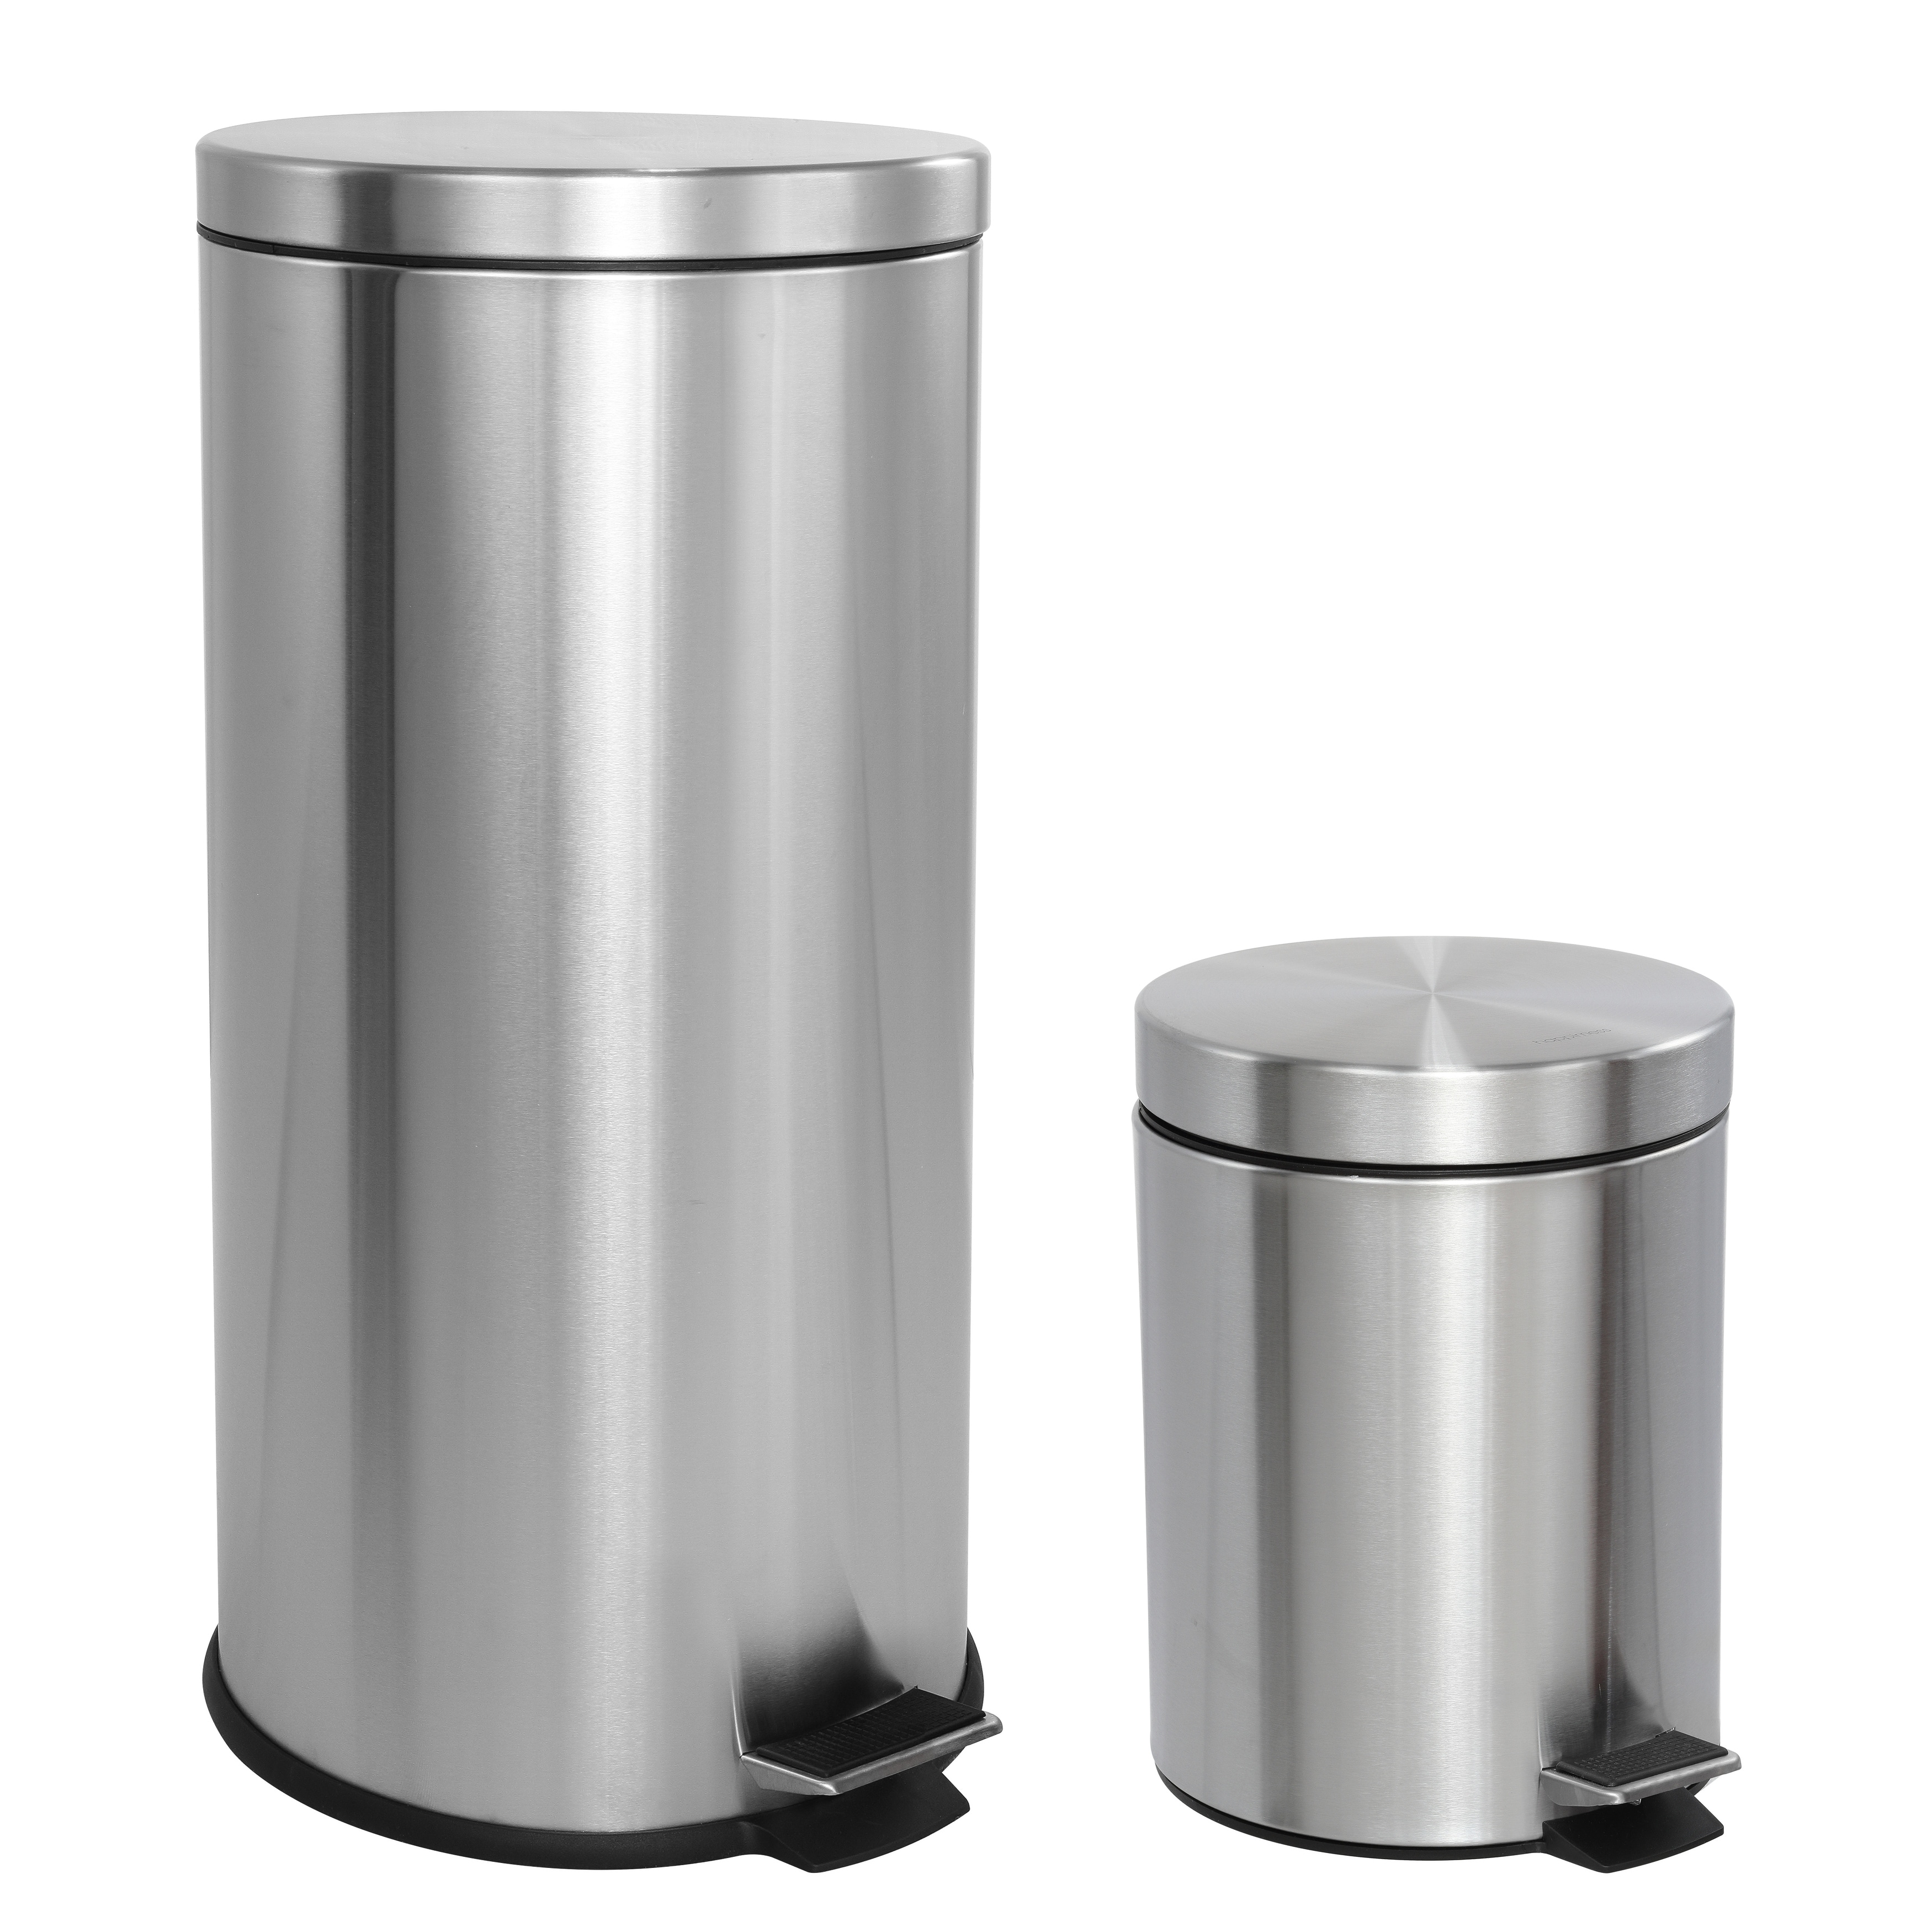 https://ak1.ostkcdn.com/images/products/is/images/direct/754a34b2c78fdb46d4f3685843cb3e9c7412fad9/happimess-Oscar-8-Gallon-Step-Open-Trash-Can-with-FREE-Mini-Trash-Can%2C-Stainless-Steel.jpg